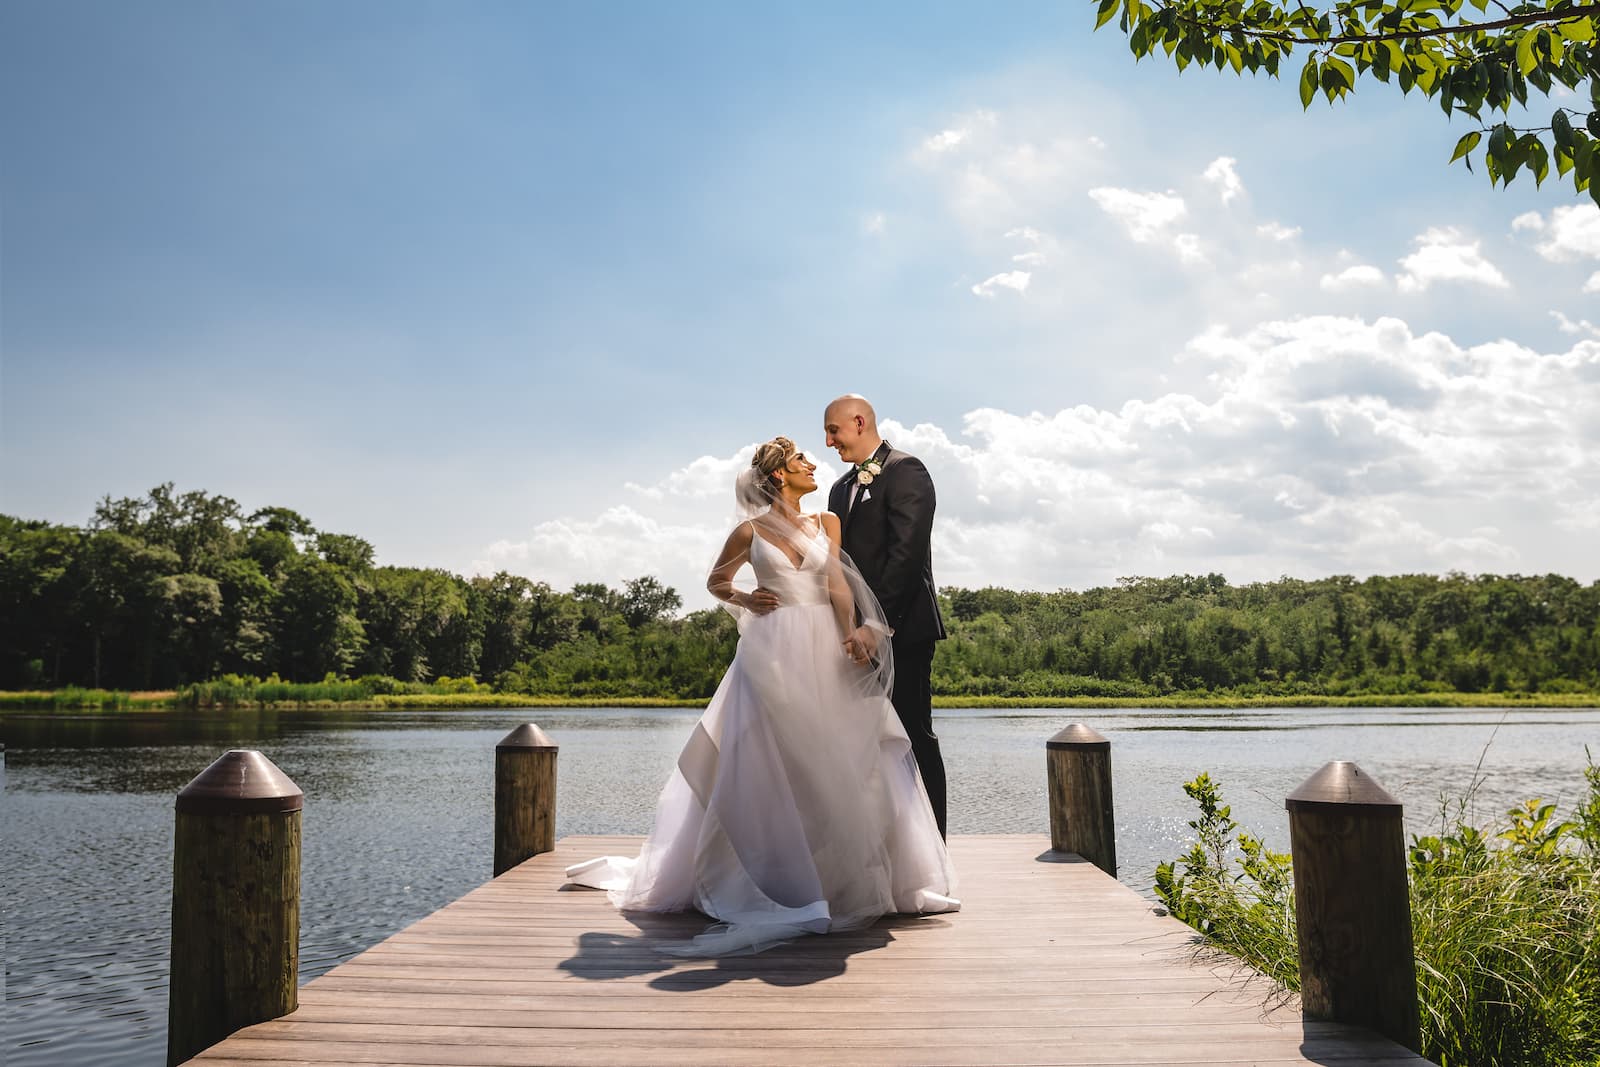 The bride and groom look at each other on a dock overlooking a lake with a blue sky.